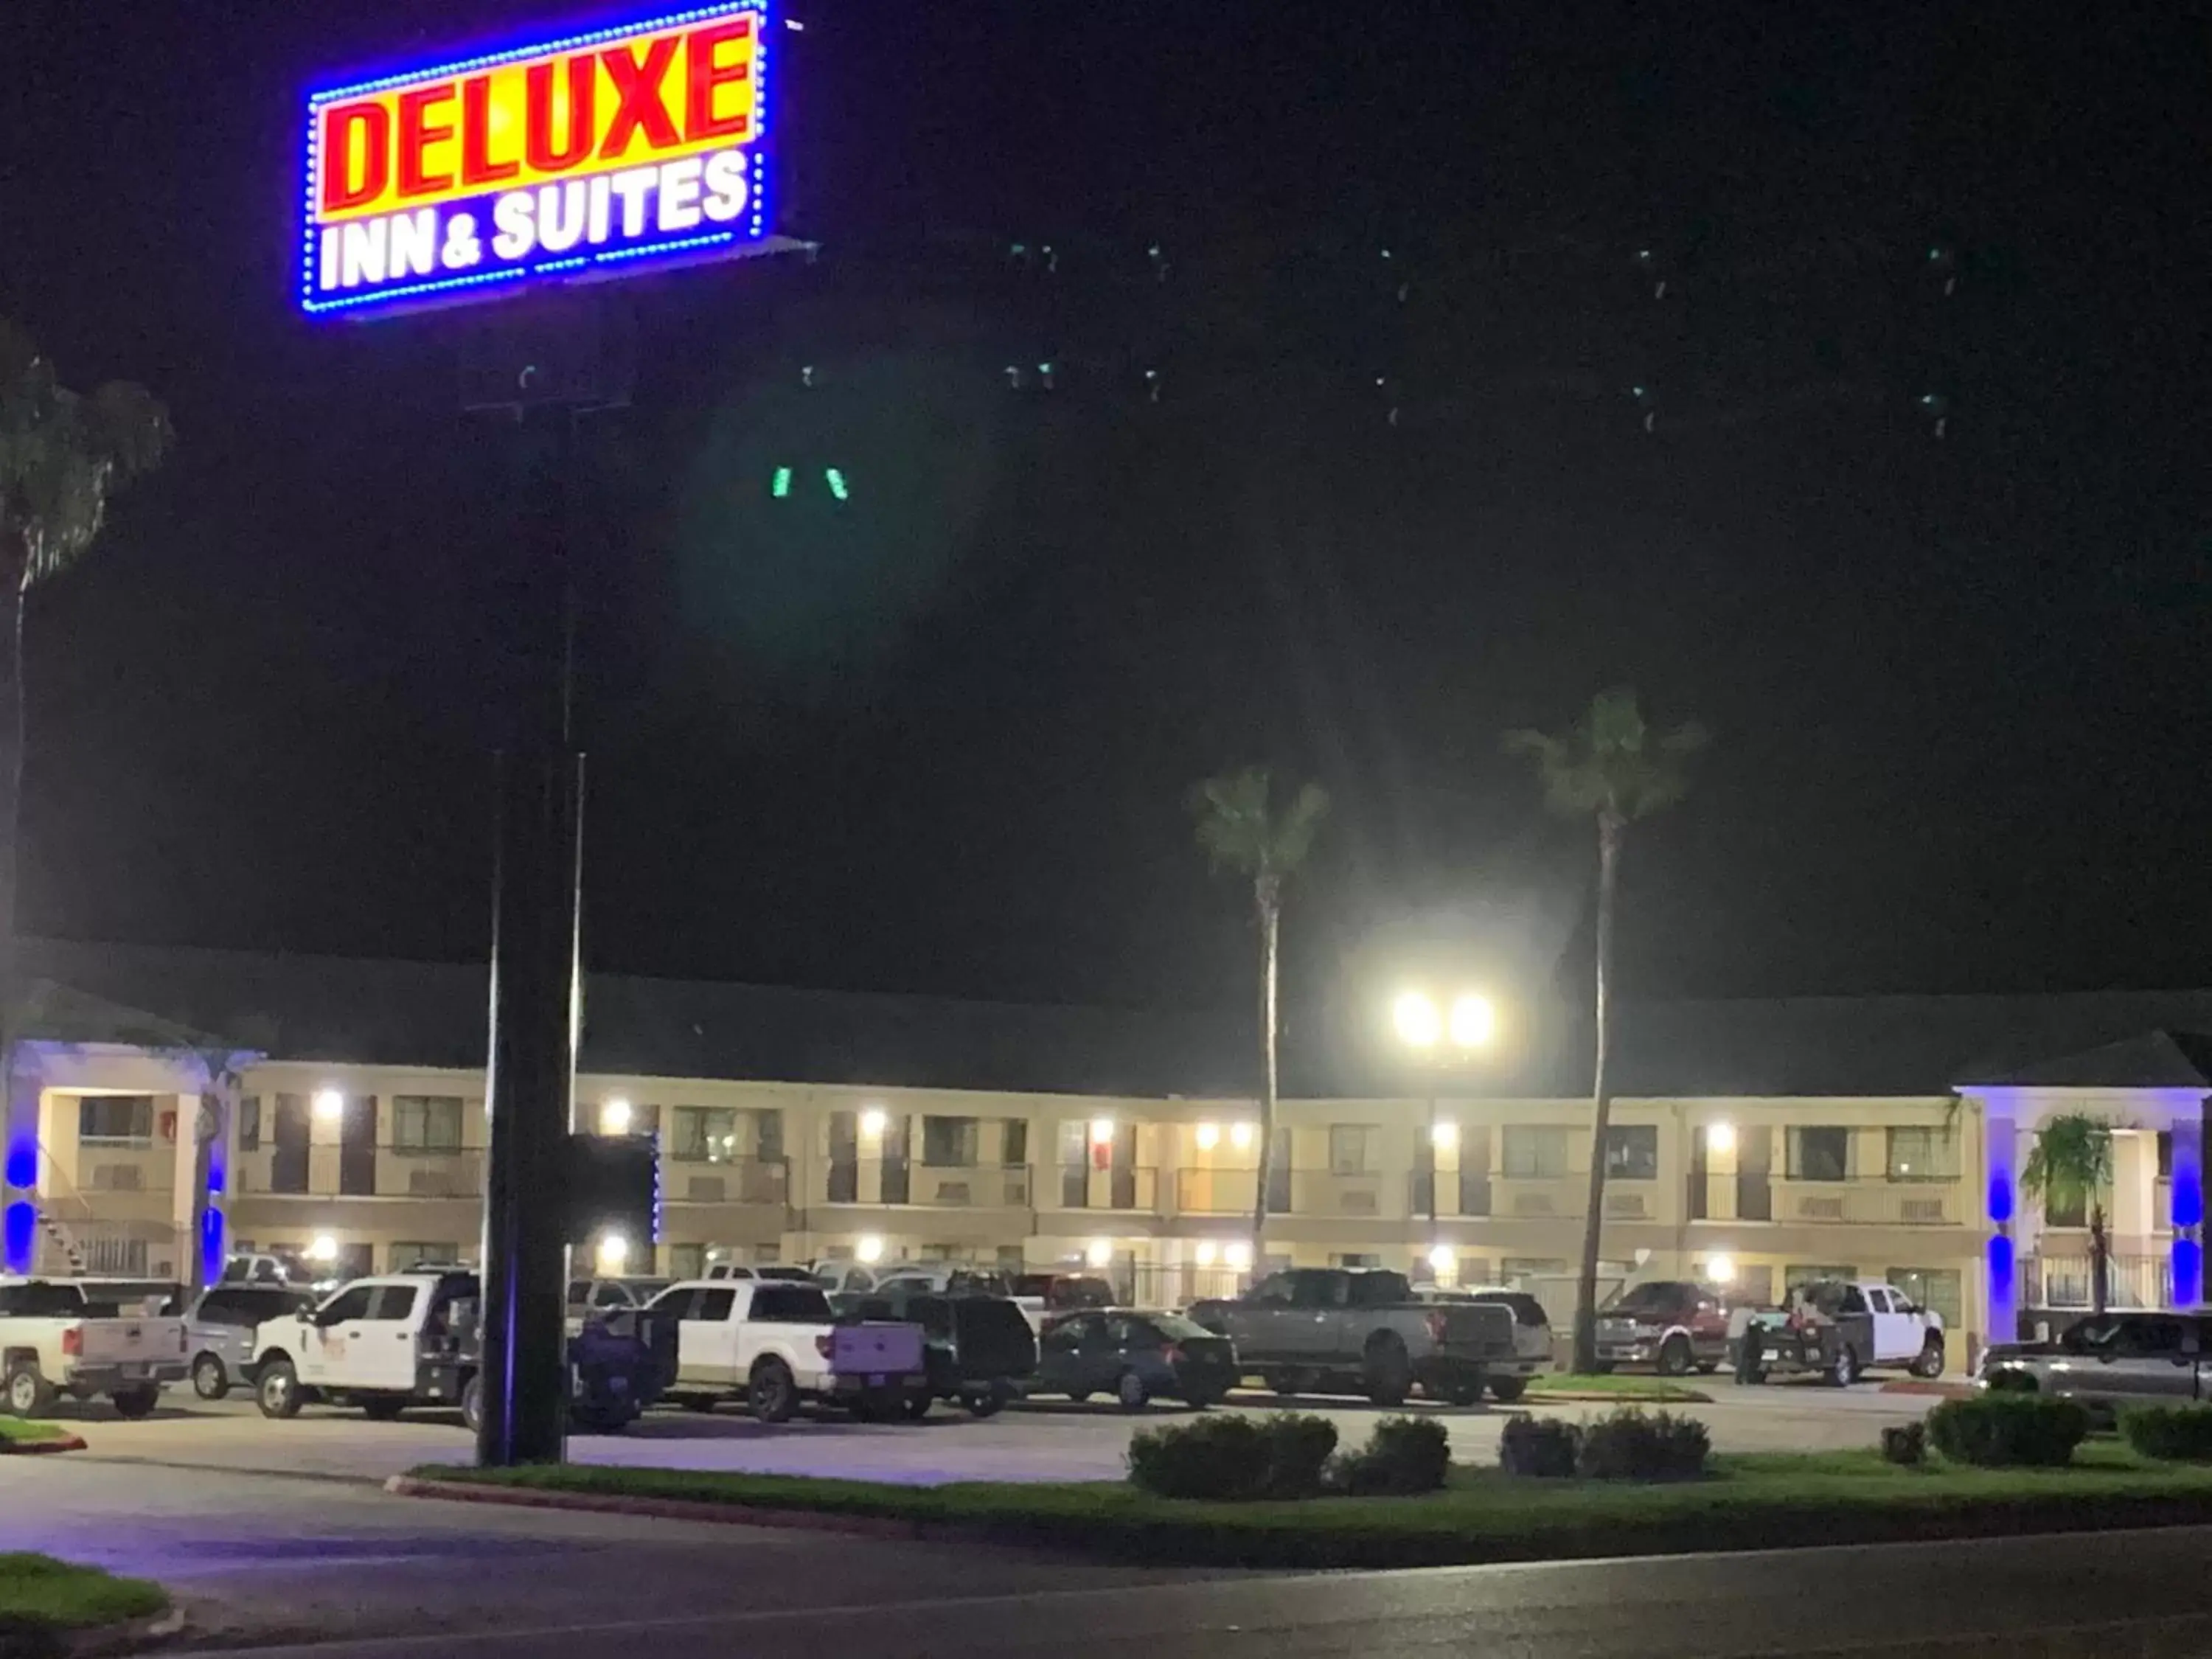 Property Building in Deluxe Inn and Suites